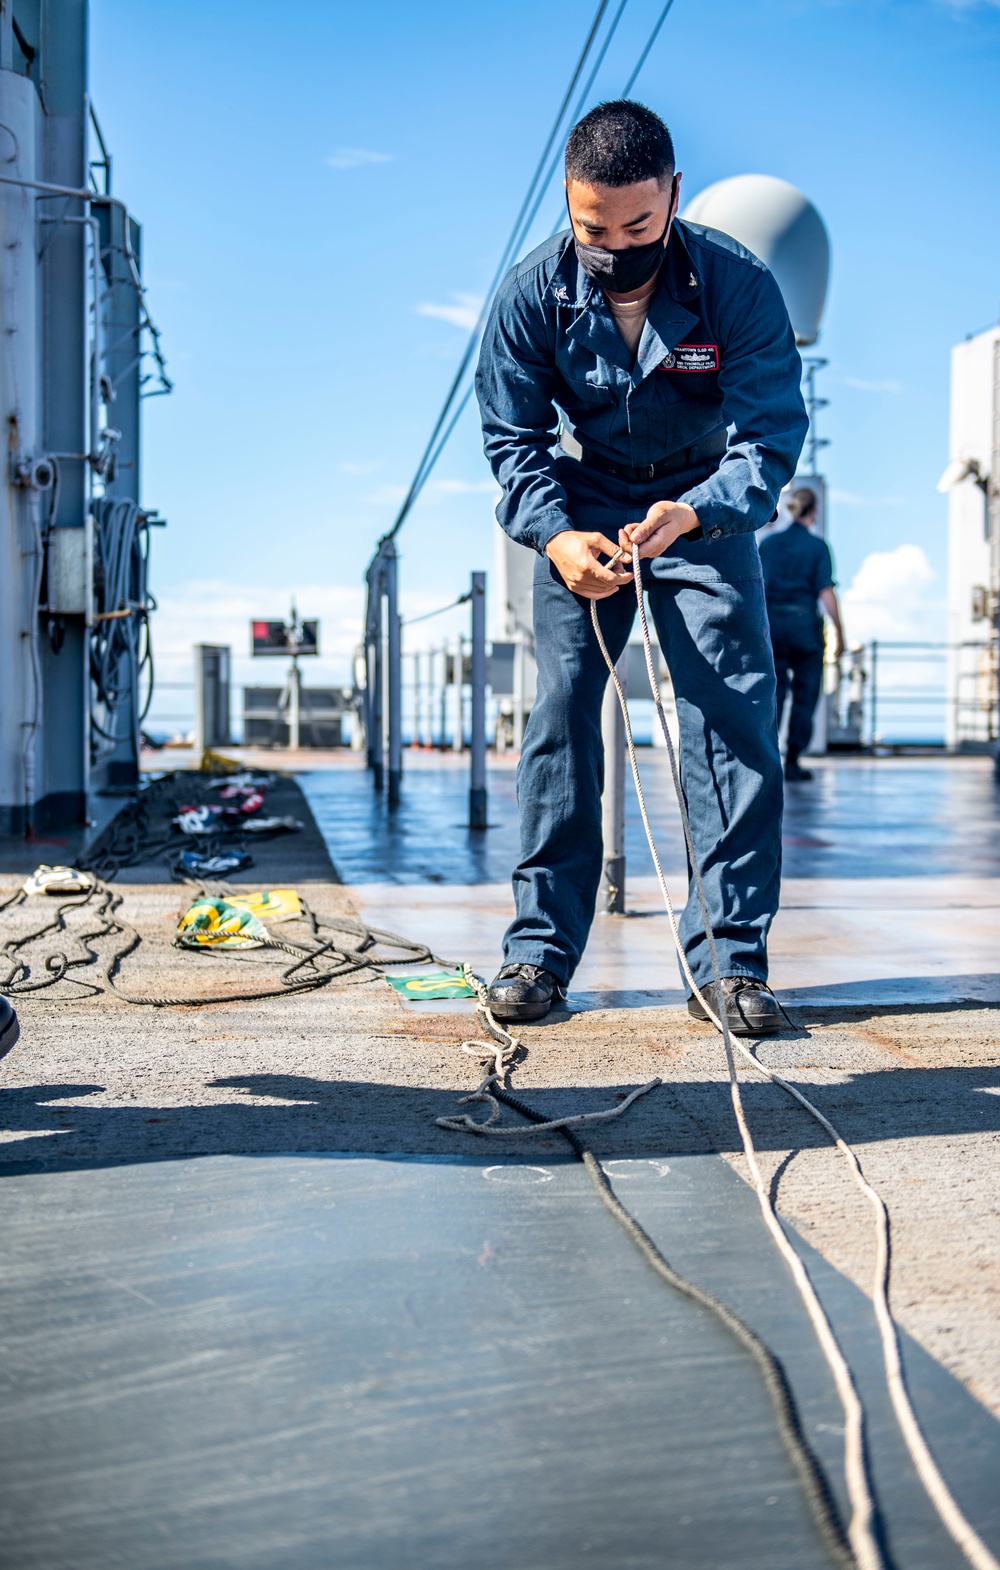 USS Germantown (LSD 42) Conducts a Replenishment-at-Sea with USNS Washington Chambers (T-AKE 11)